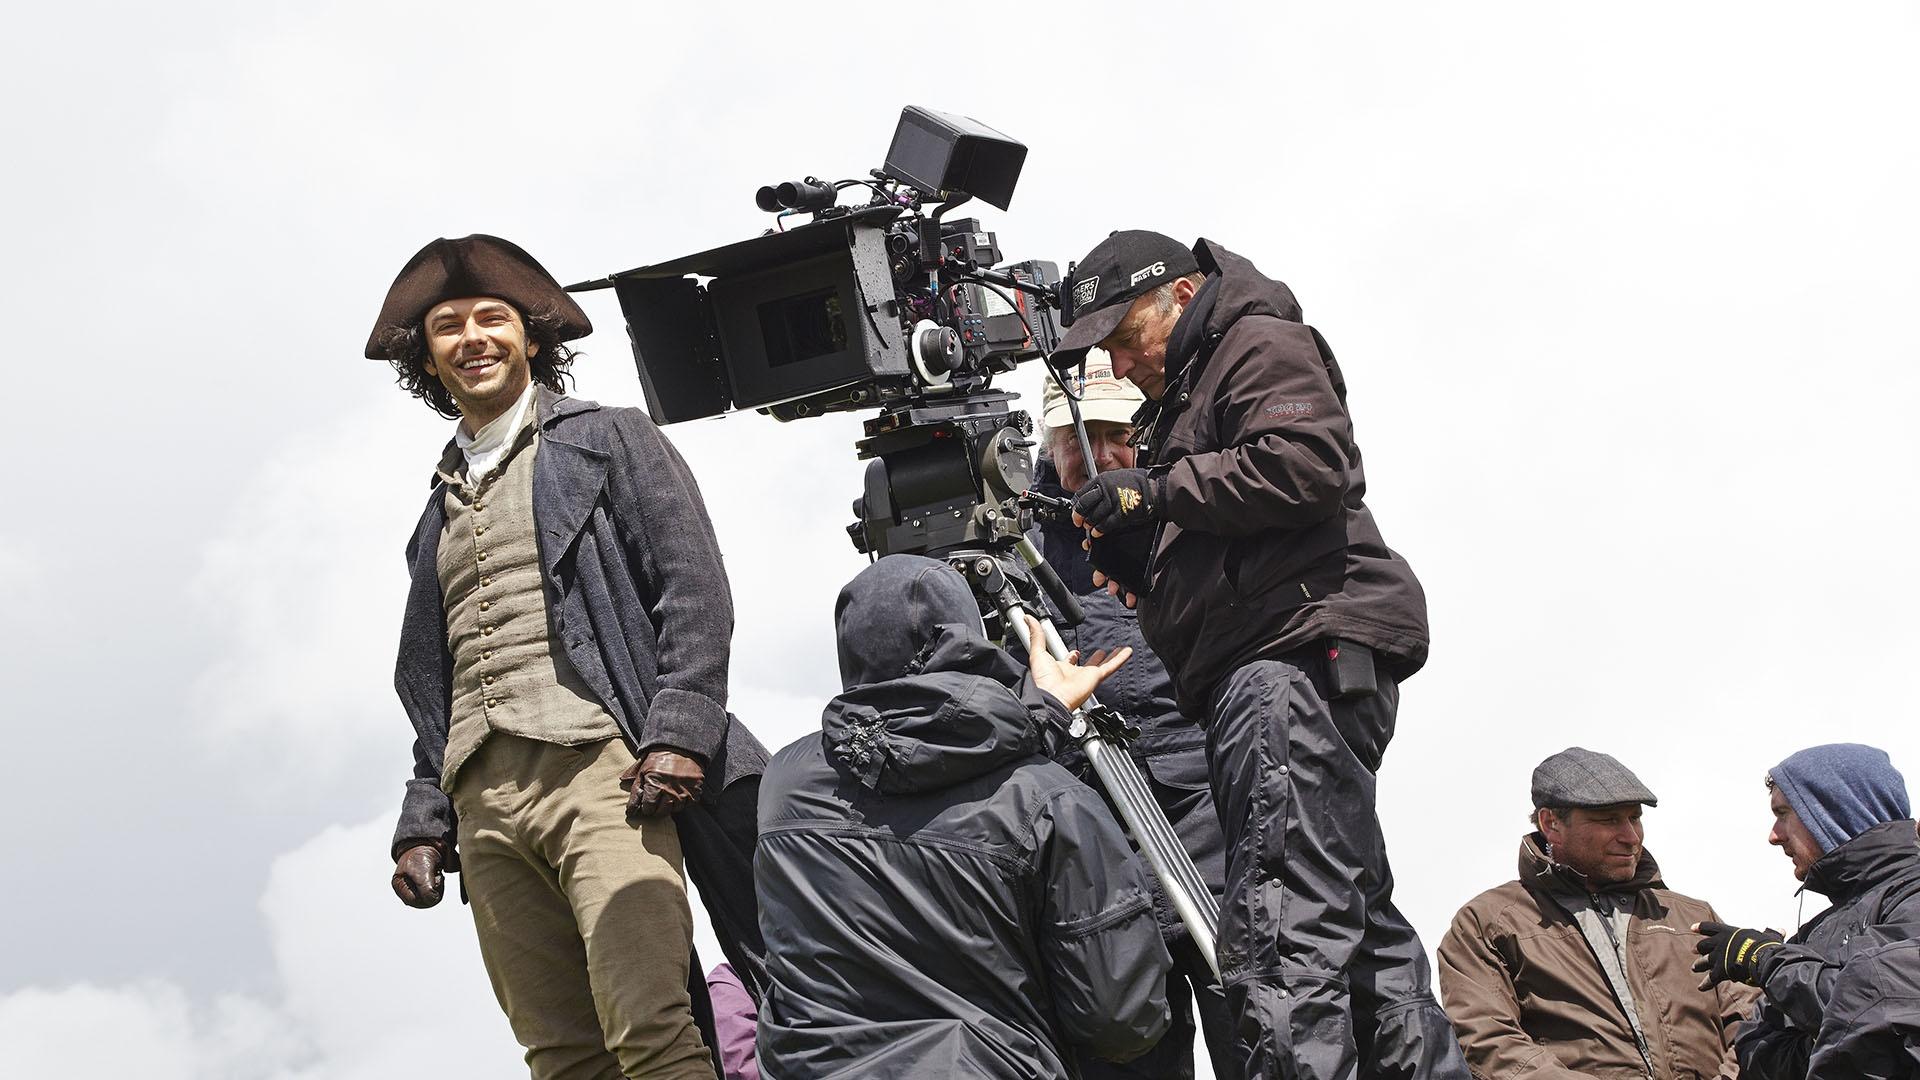 Aidan Turner, in costume as Ross Poldark, stands by the camera.